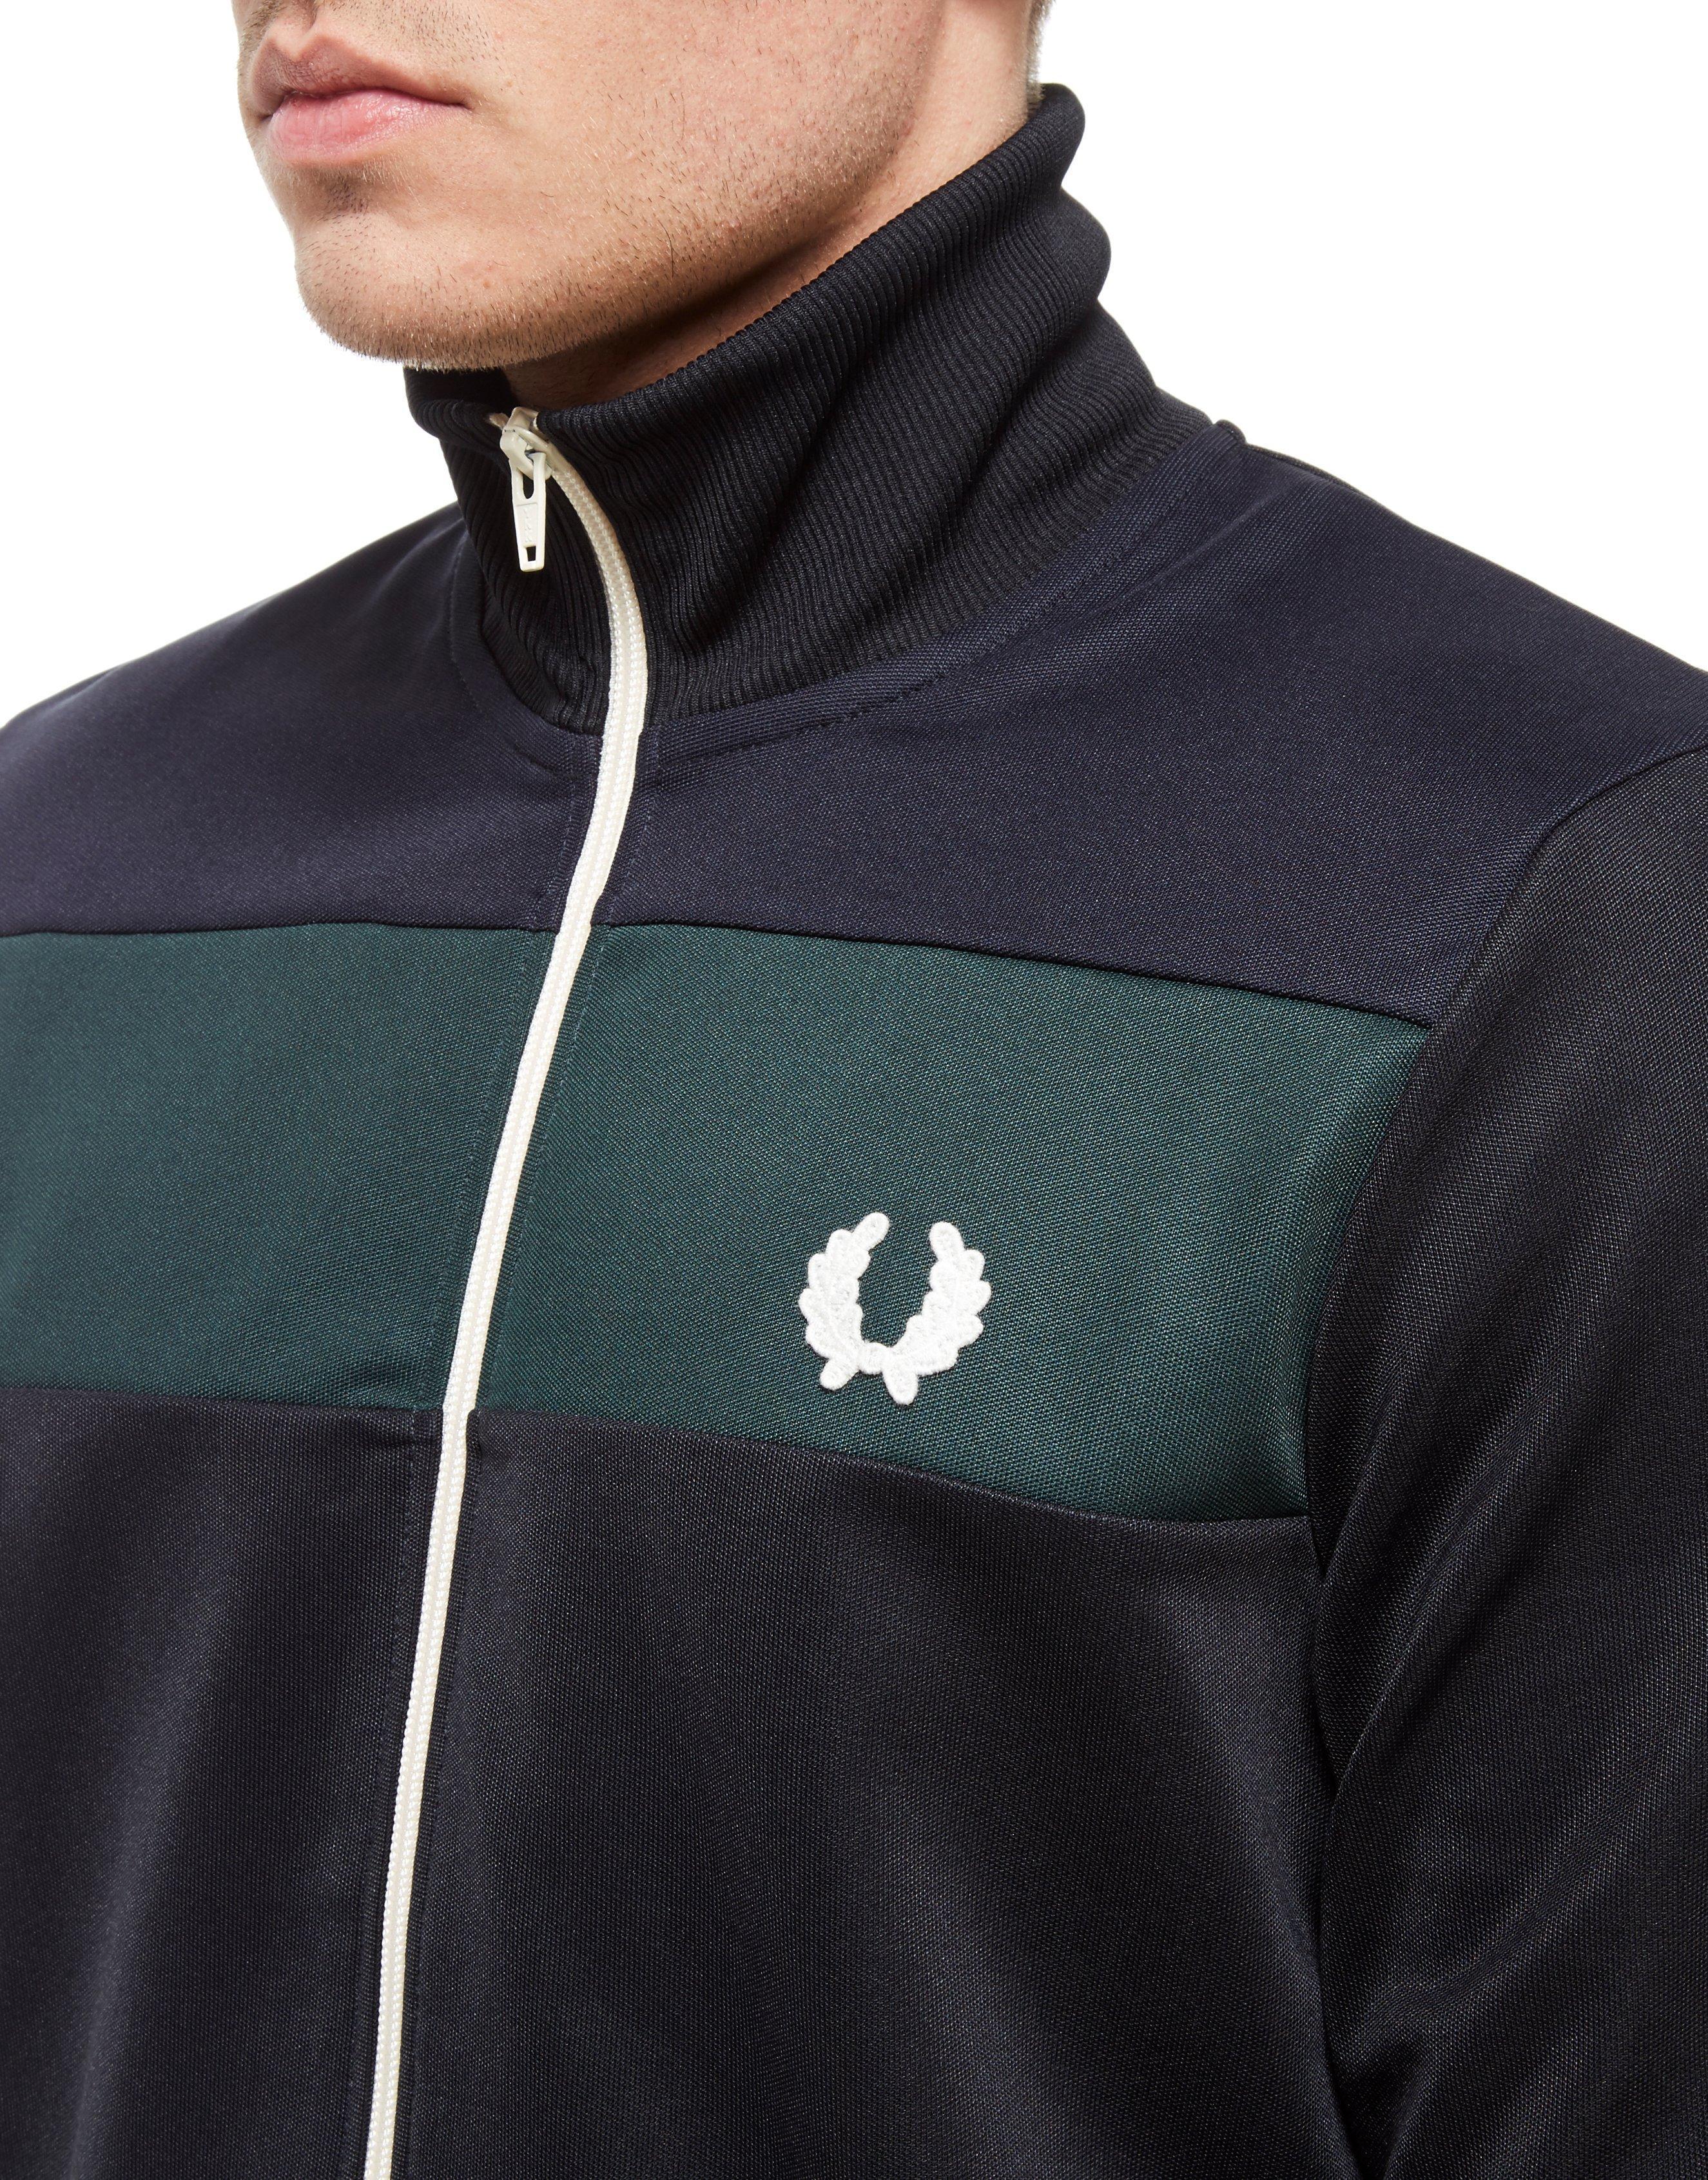 Fred Perry Synthetic Colourblock Track Top in Black/Navy/Green (Black ...